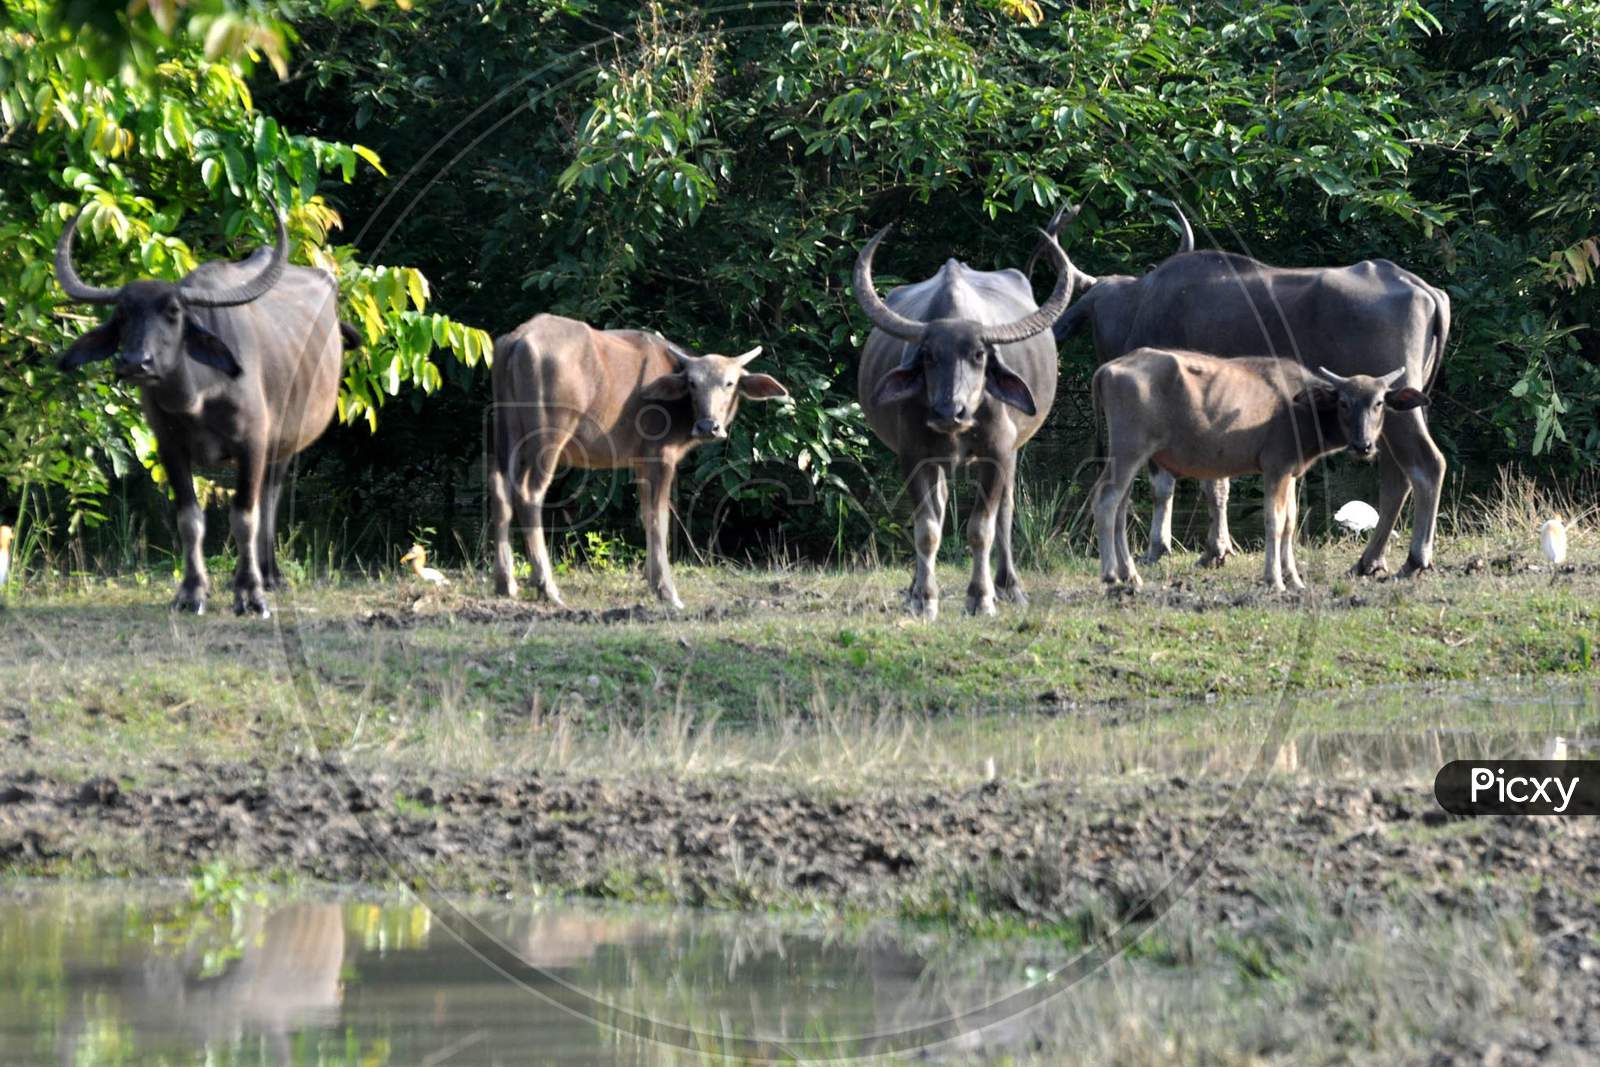 Wild Buffalos Take Shelter On A Highland, In A Flood Affected Area Inside The Pobitora Wildlife Sanctuary, In Morigaon District, Tuesday, June 30, 2020.